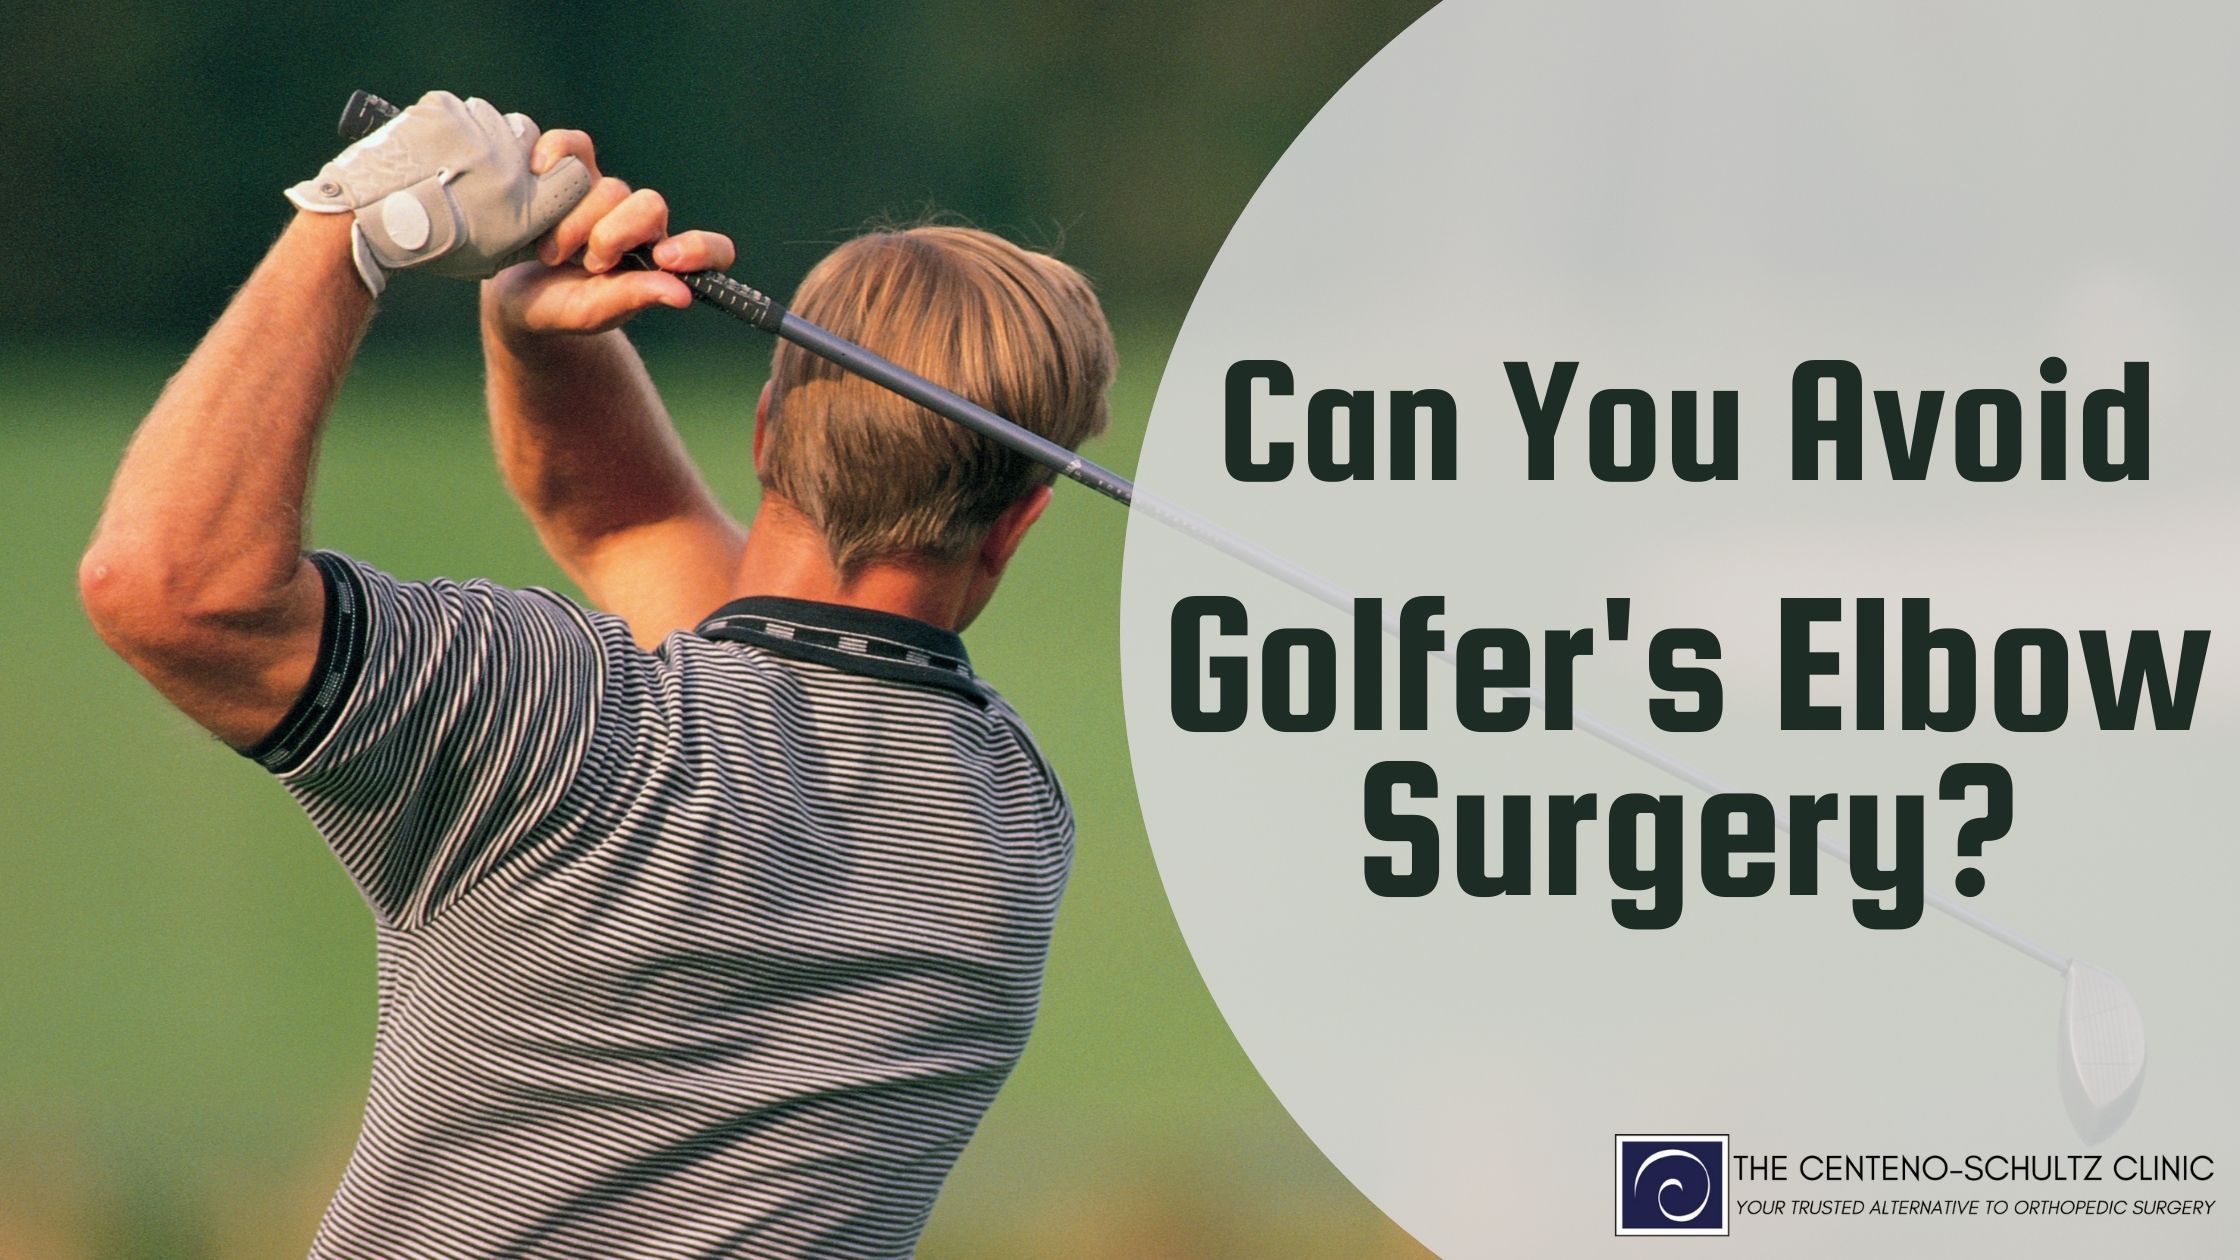 Can you avoid golfer's elbow surgery